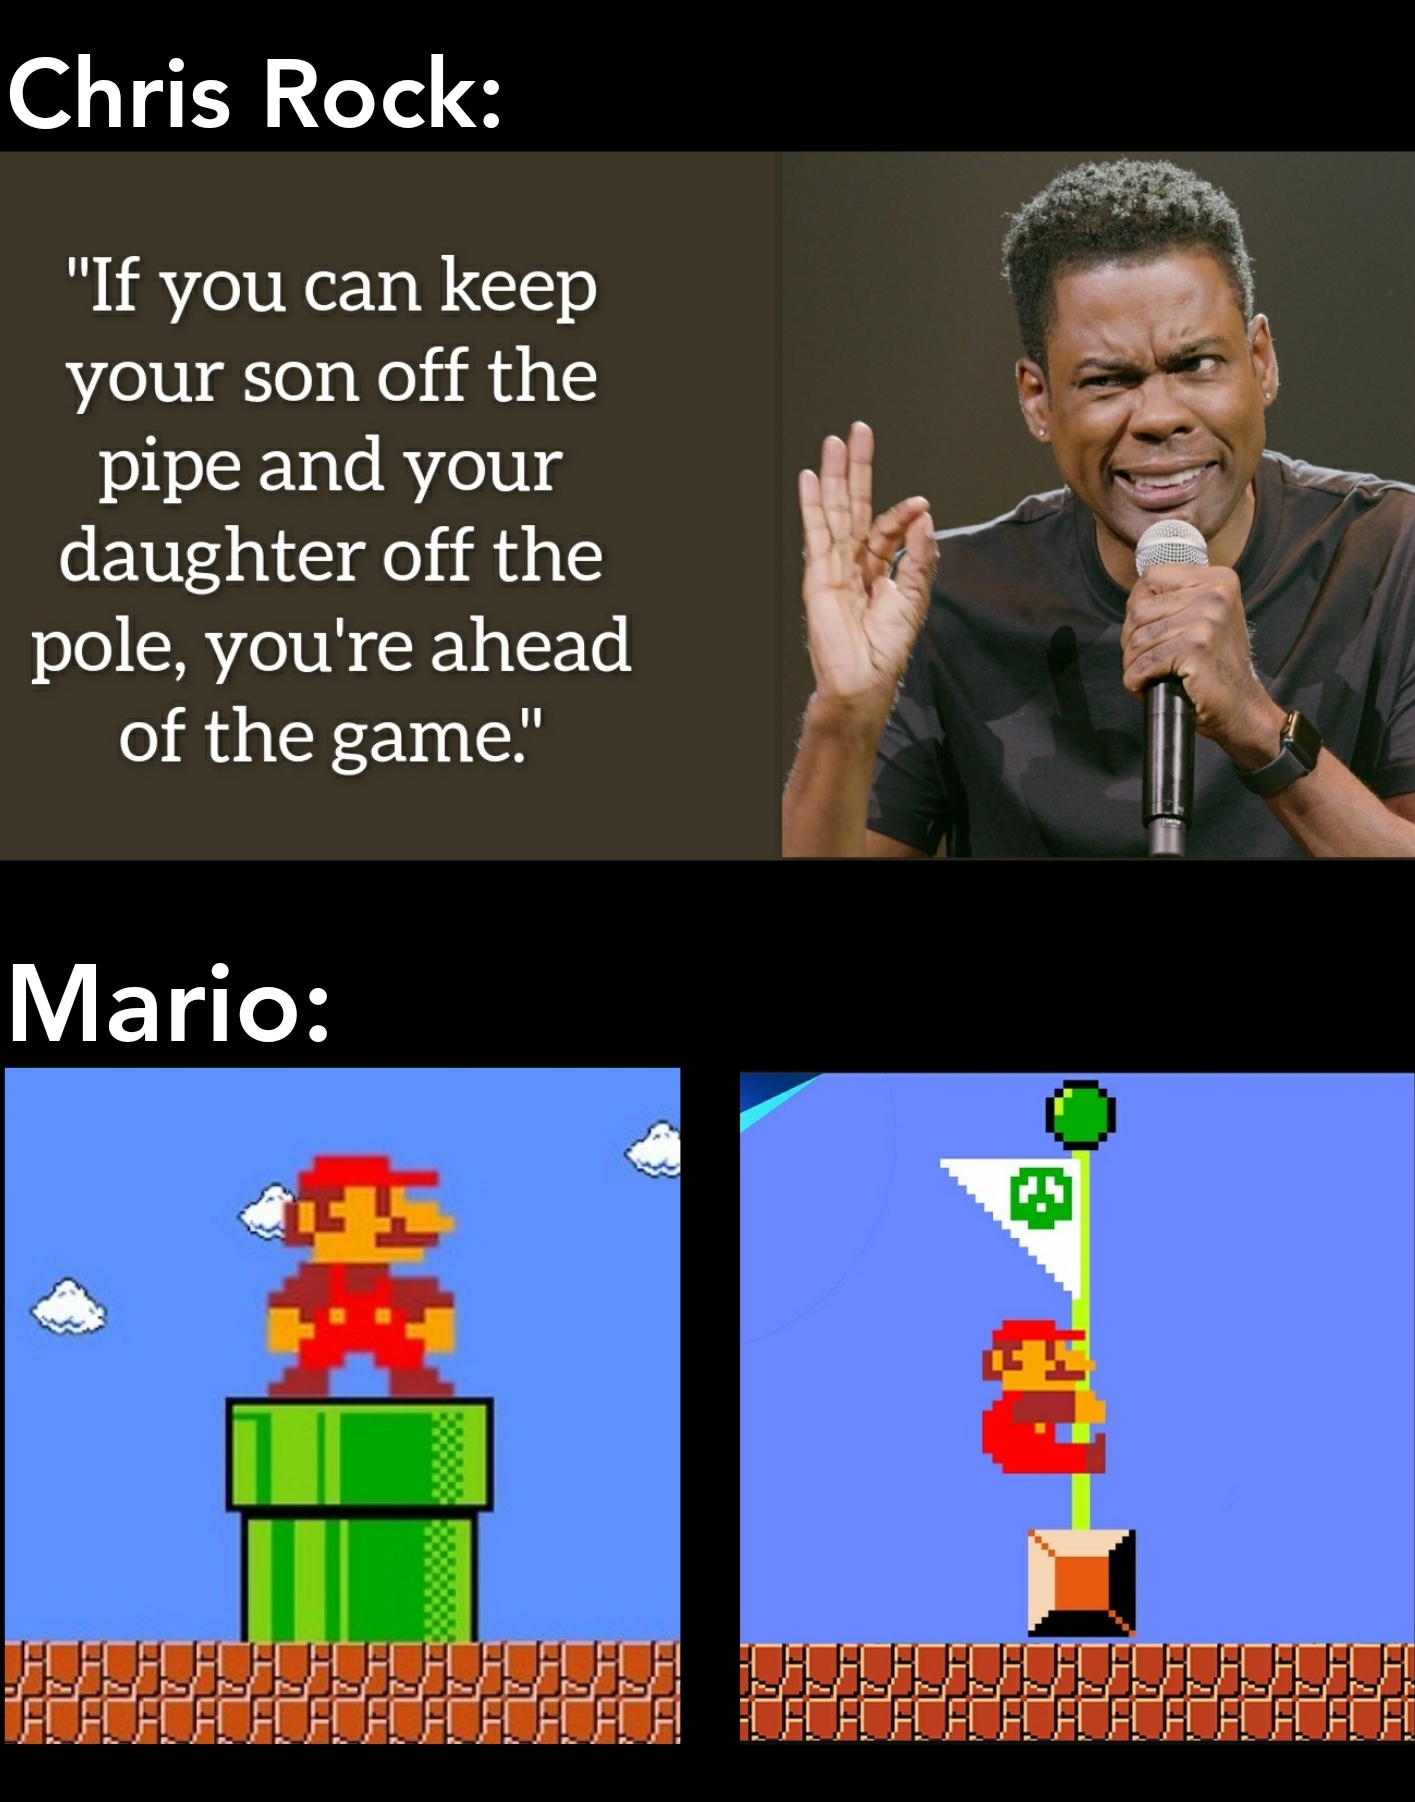 monday morning randomness - super mario - Chris Rock "If you can keep your son off the pipe and your daughter off the pole, you're ahead of the game!" Mario B